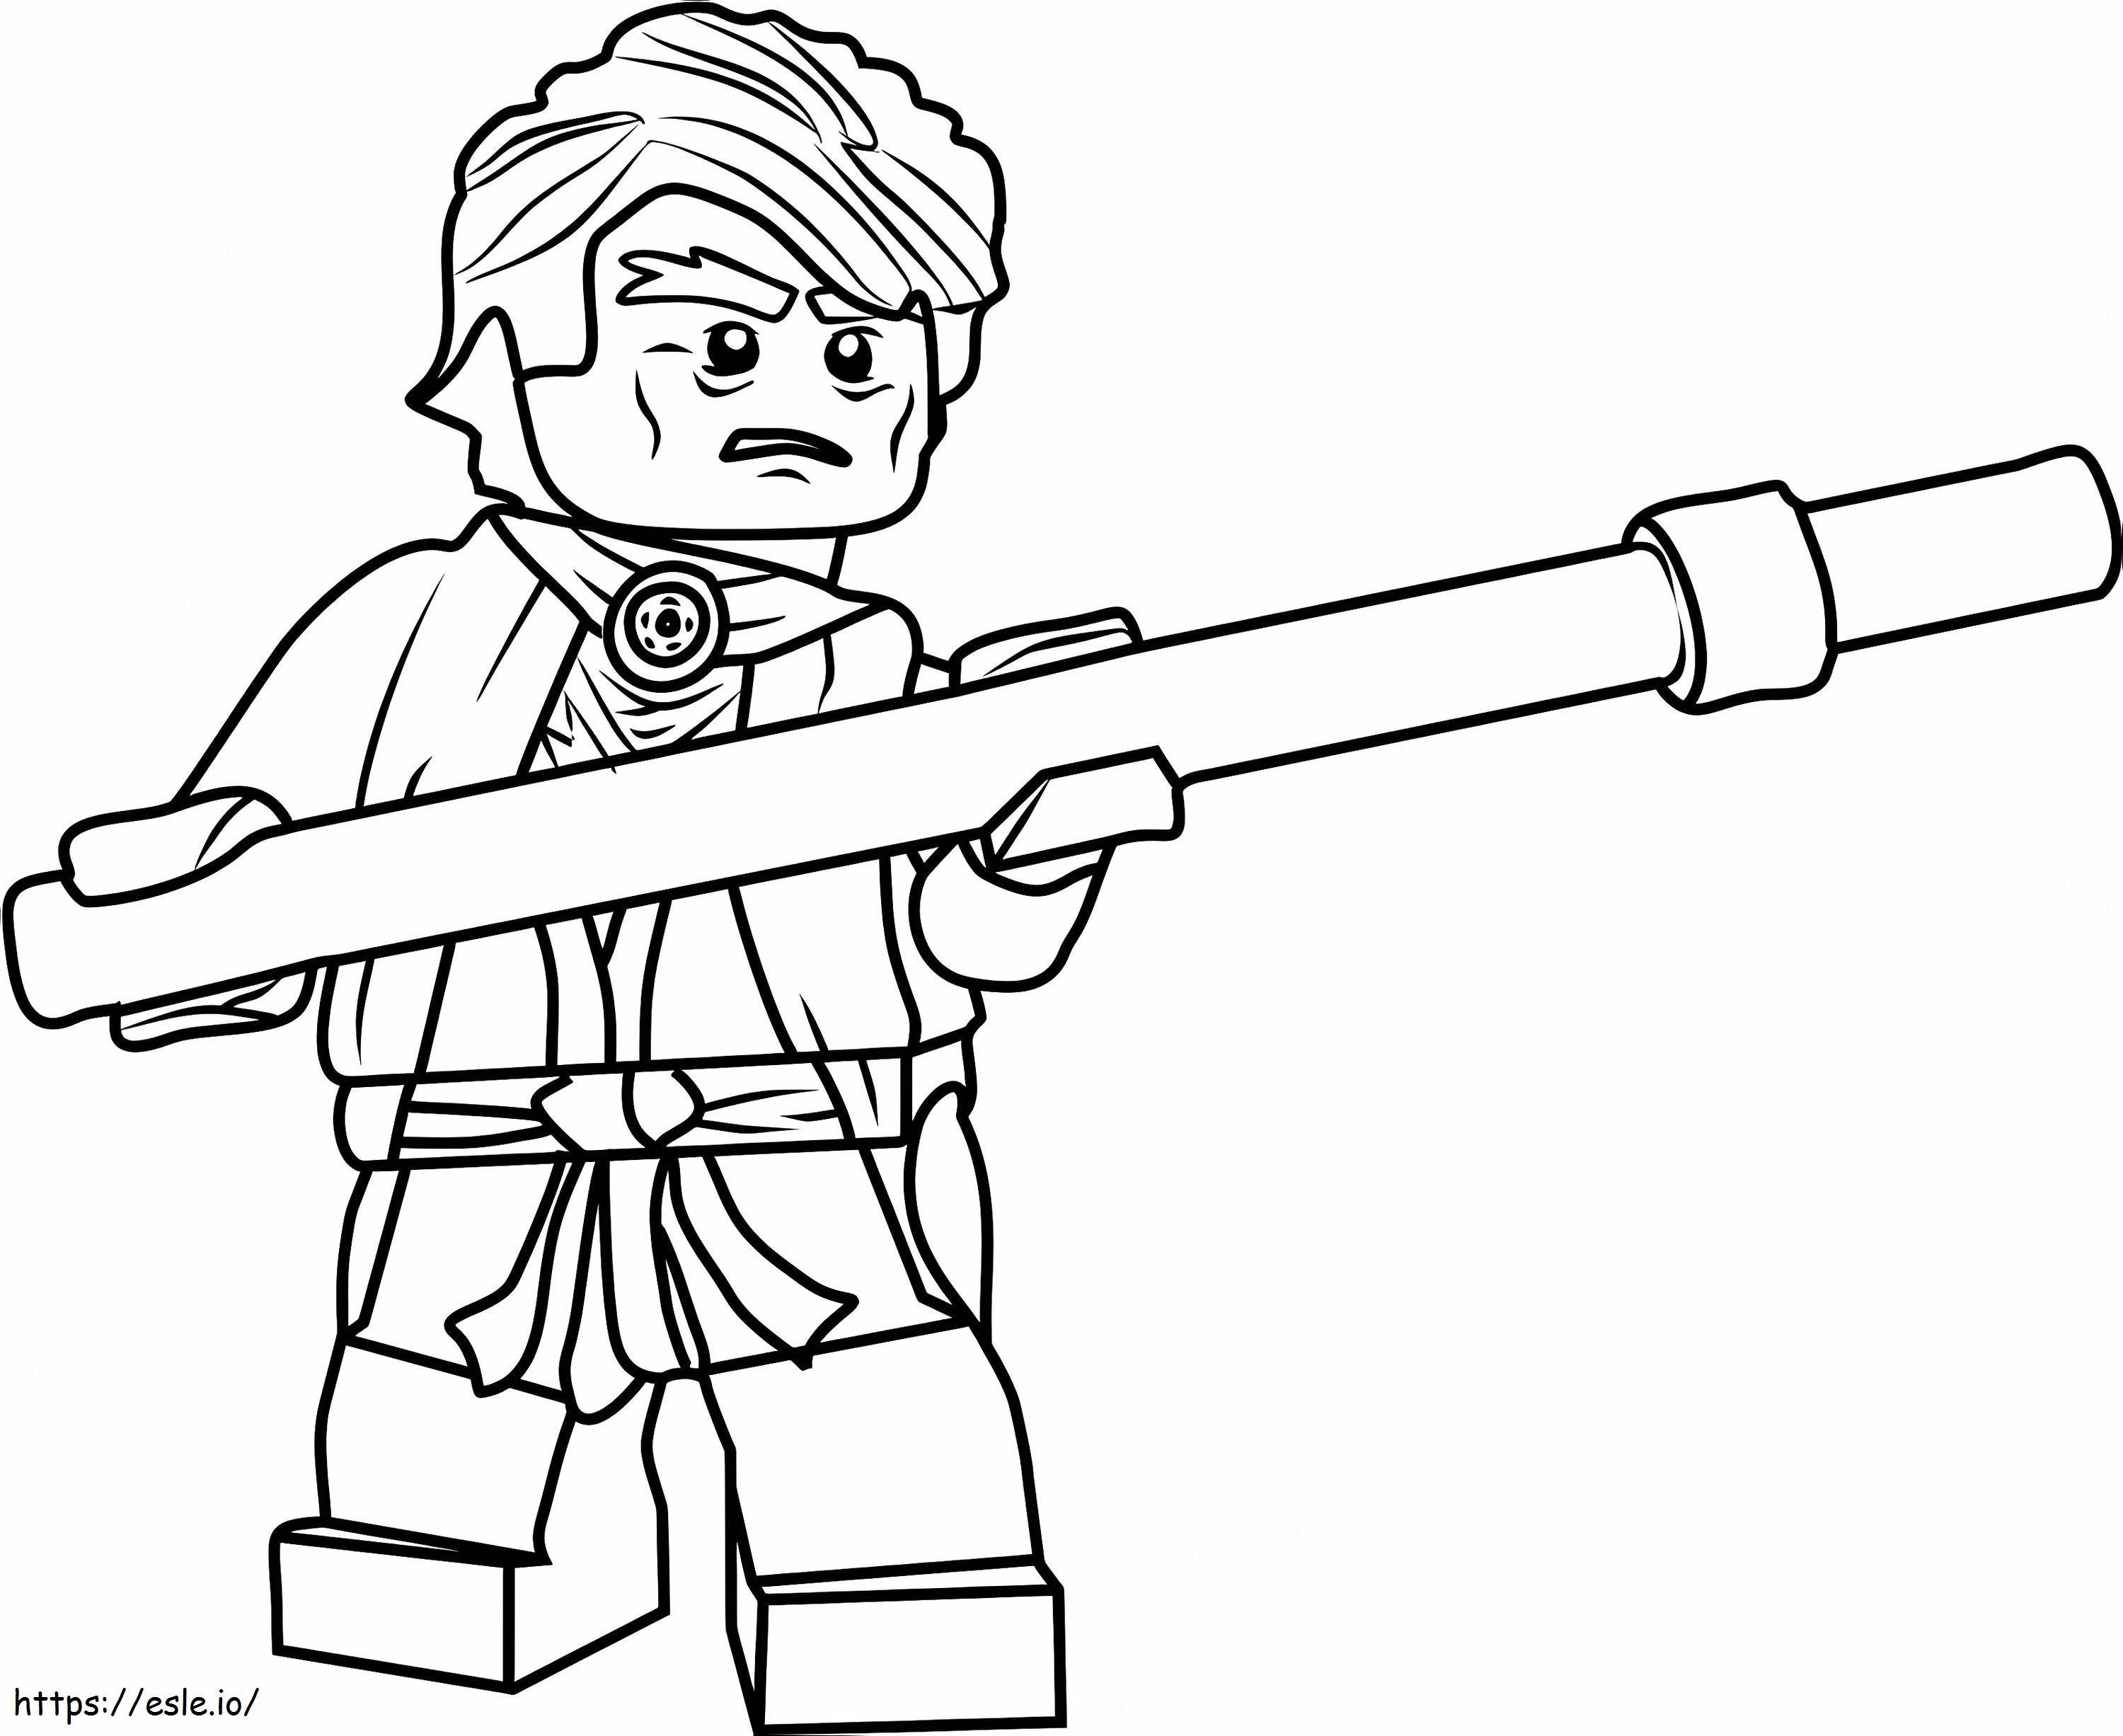 1529724952 12 coloring page